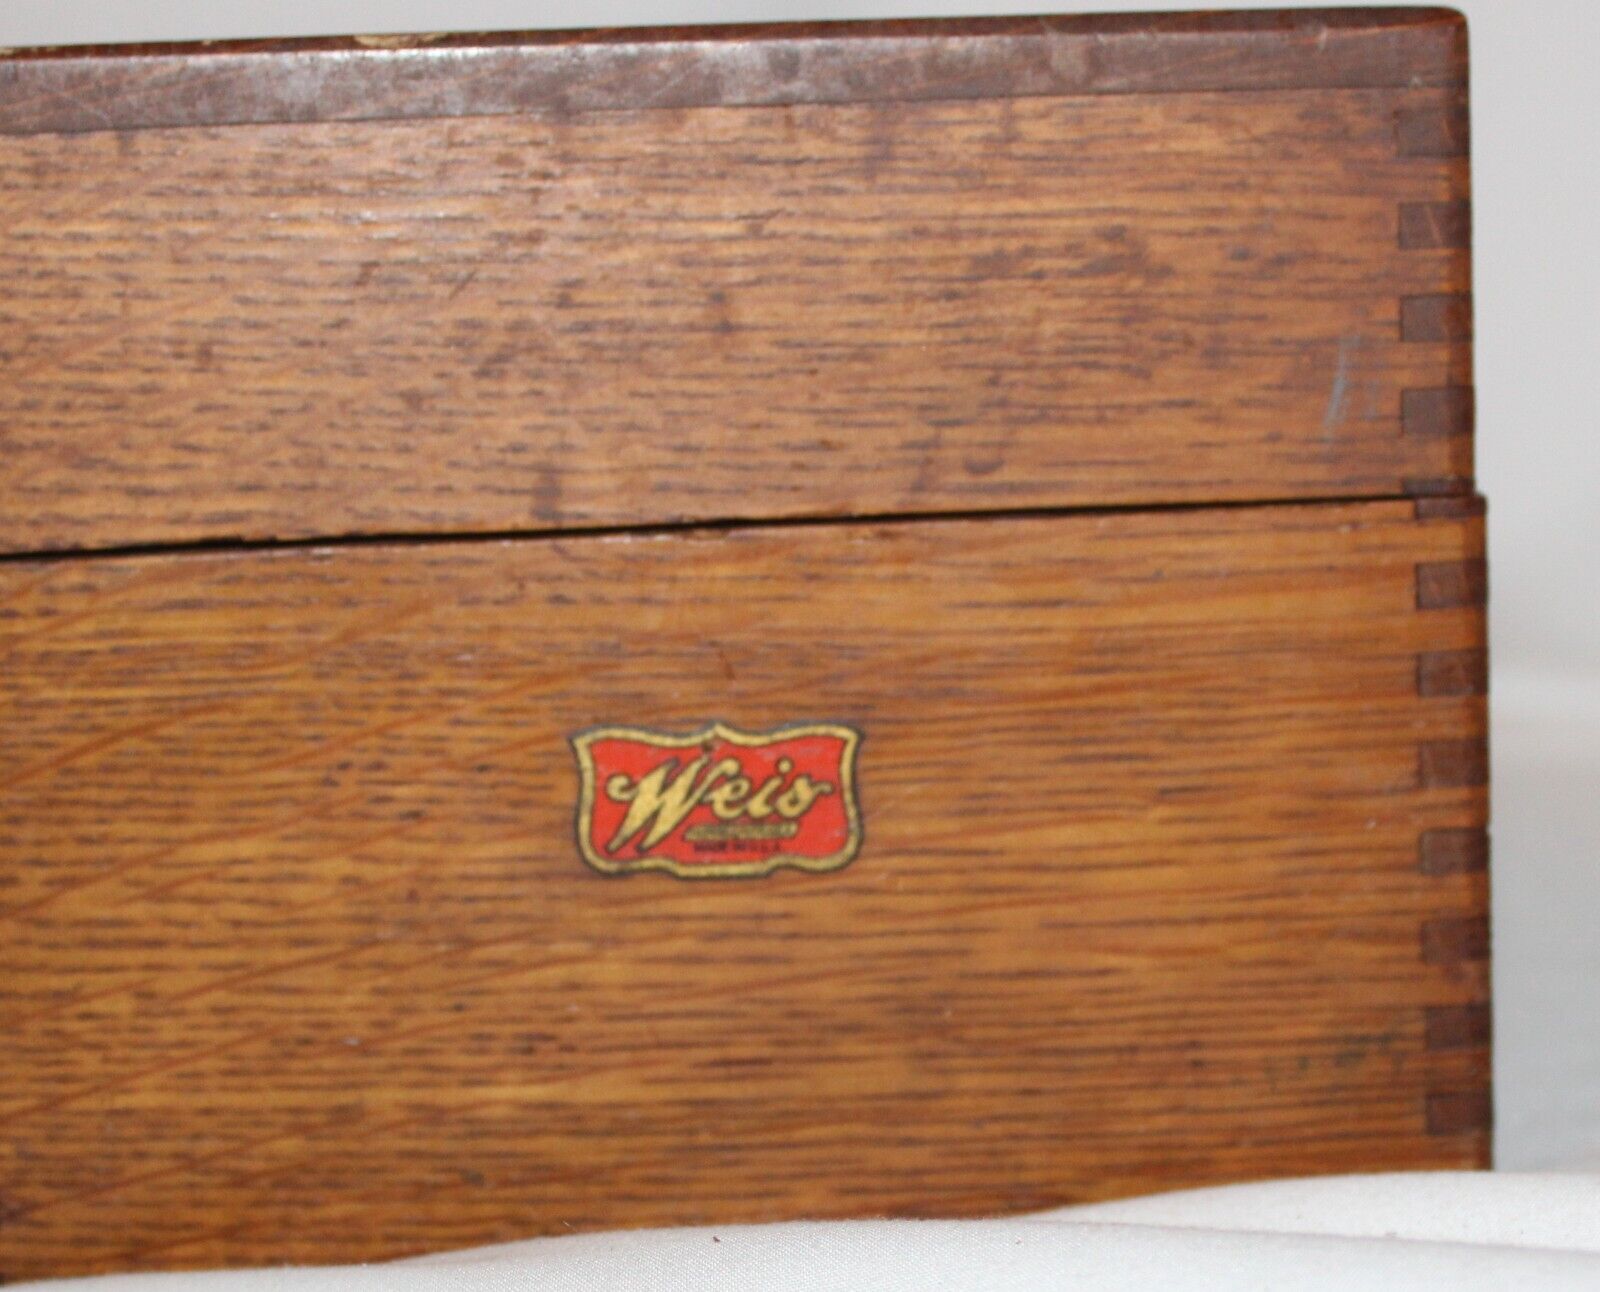 Antique Vintage WEIS Wood Index Card File Box holds Dovetail Edges